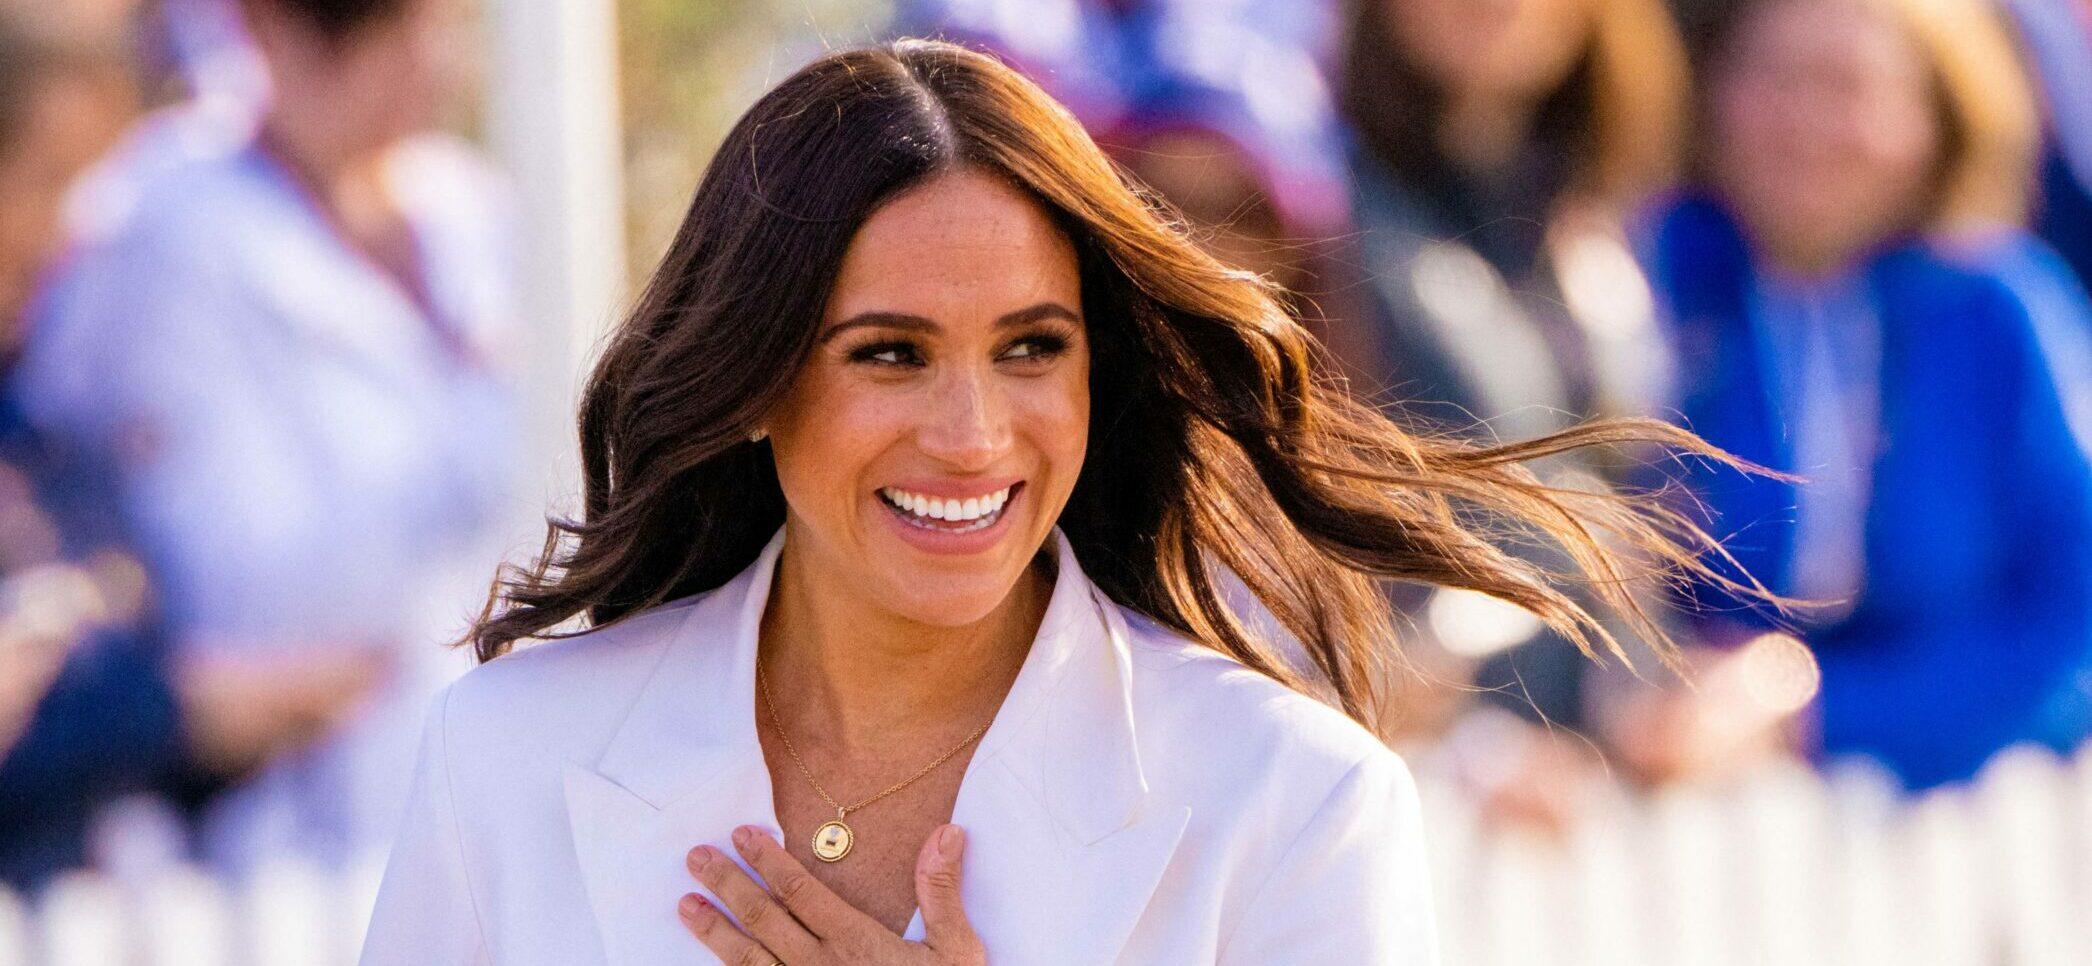 Meghan Markle Reportedly Gearing Up To Launch New Commercial Project ‘Genuine To Who She Is’